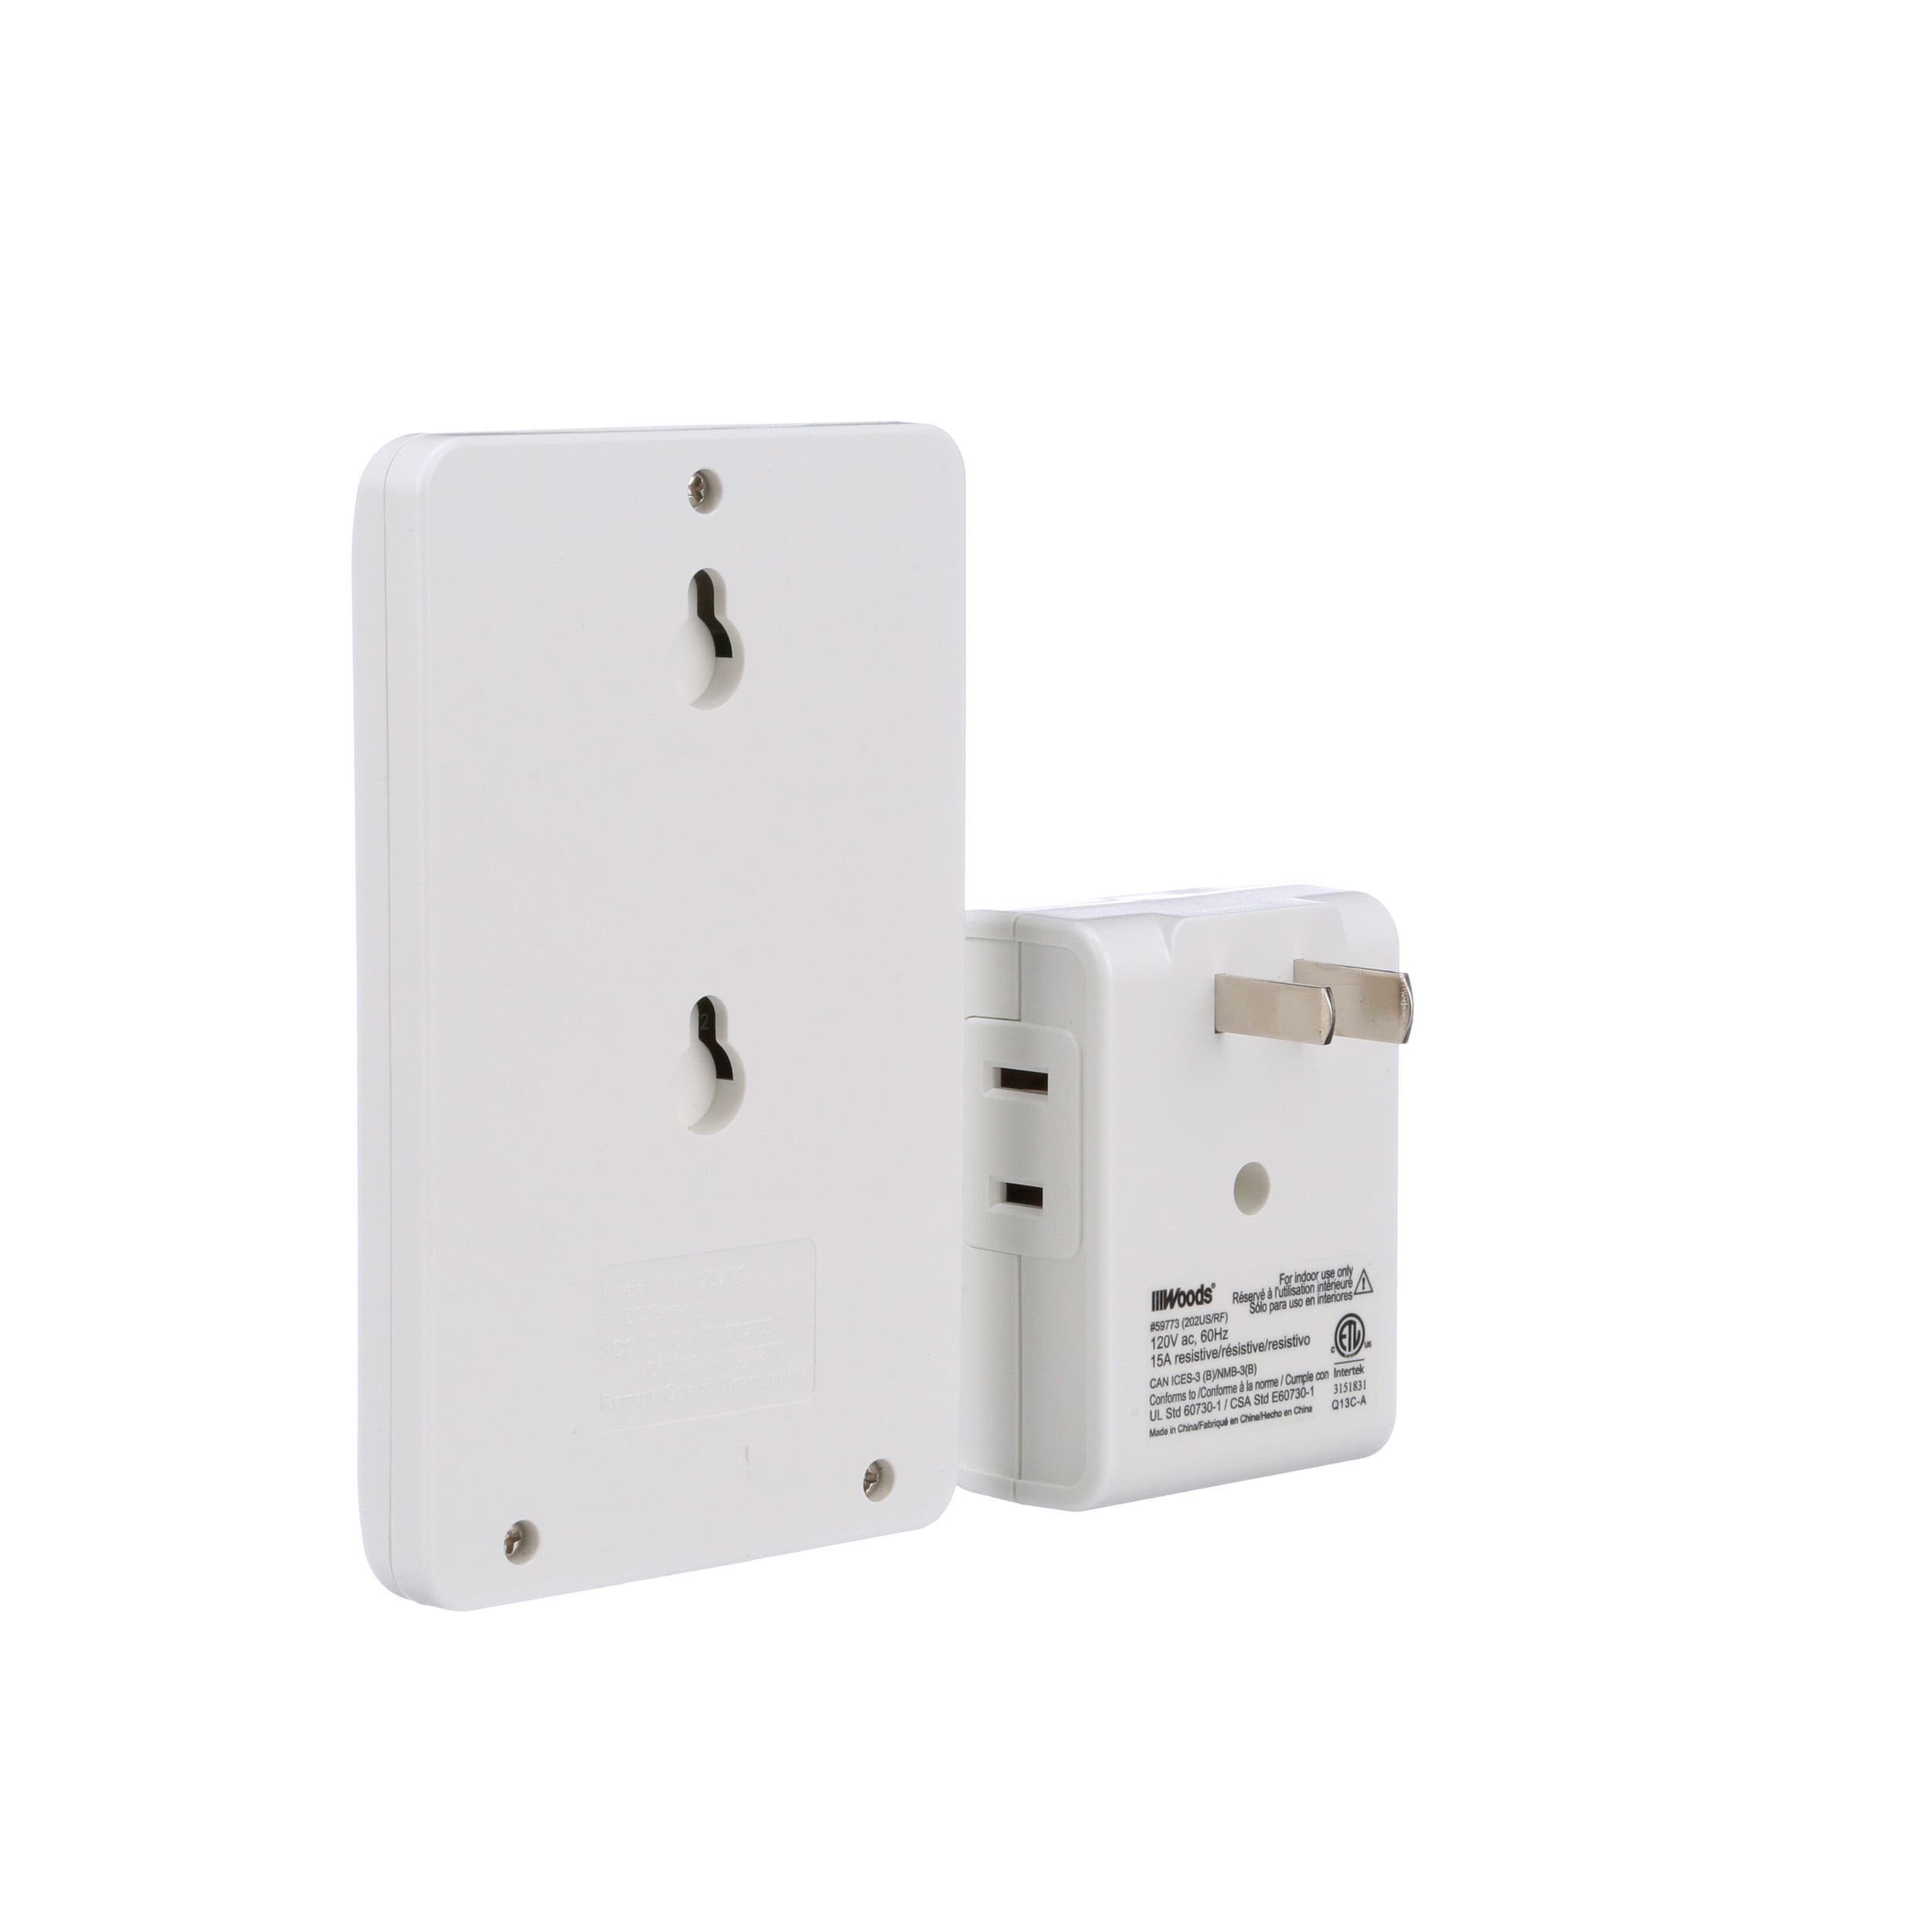 Woods 59773 Wireless Wall Switch Remote for Indoor Light Control White